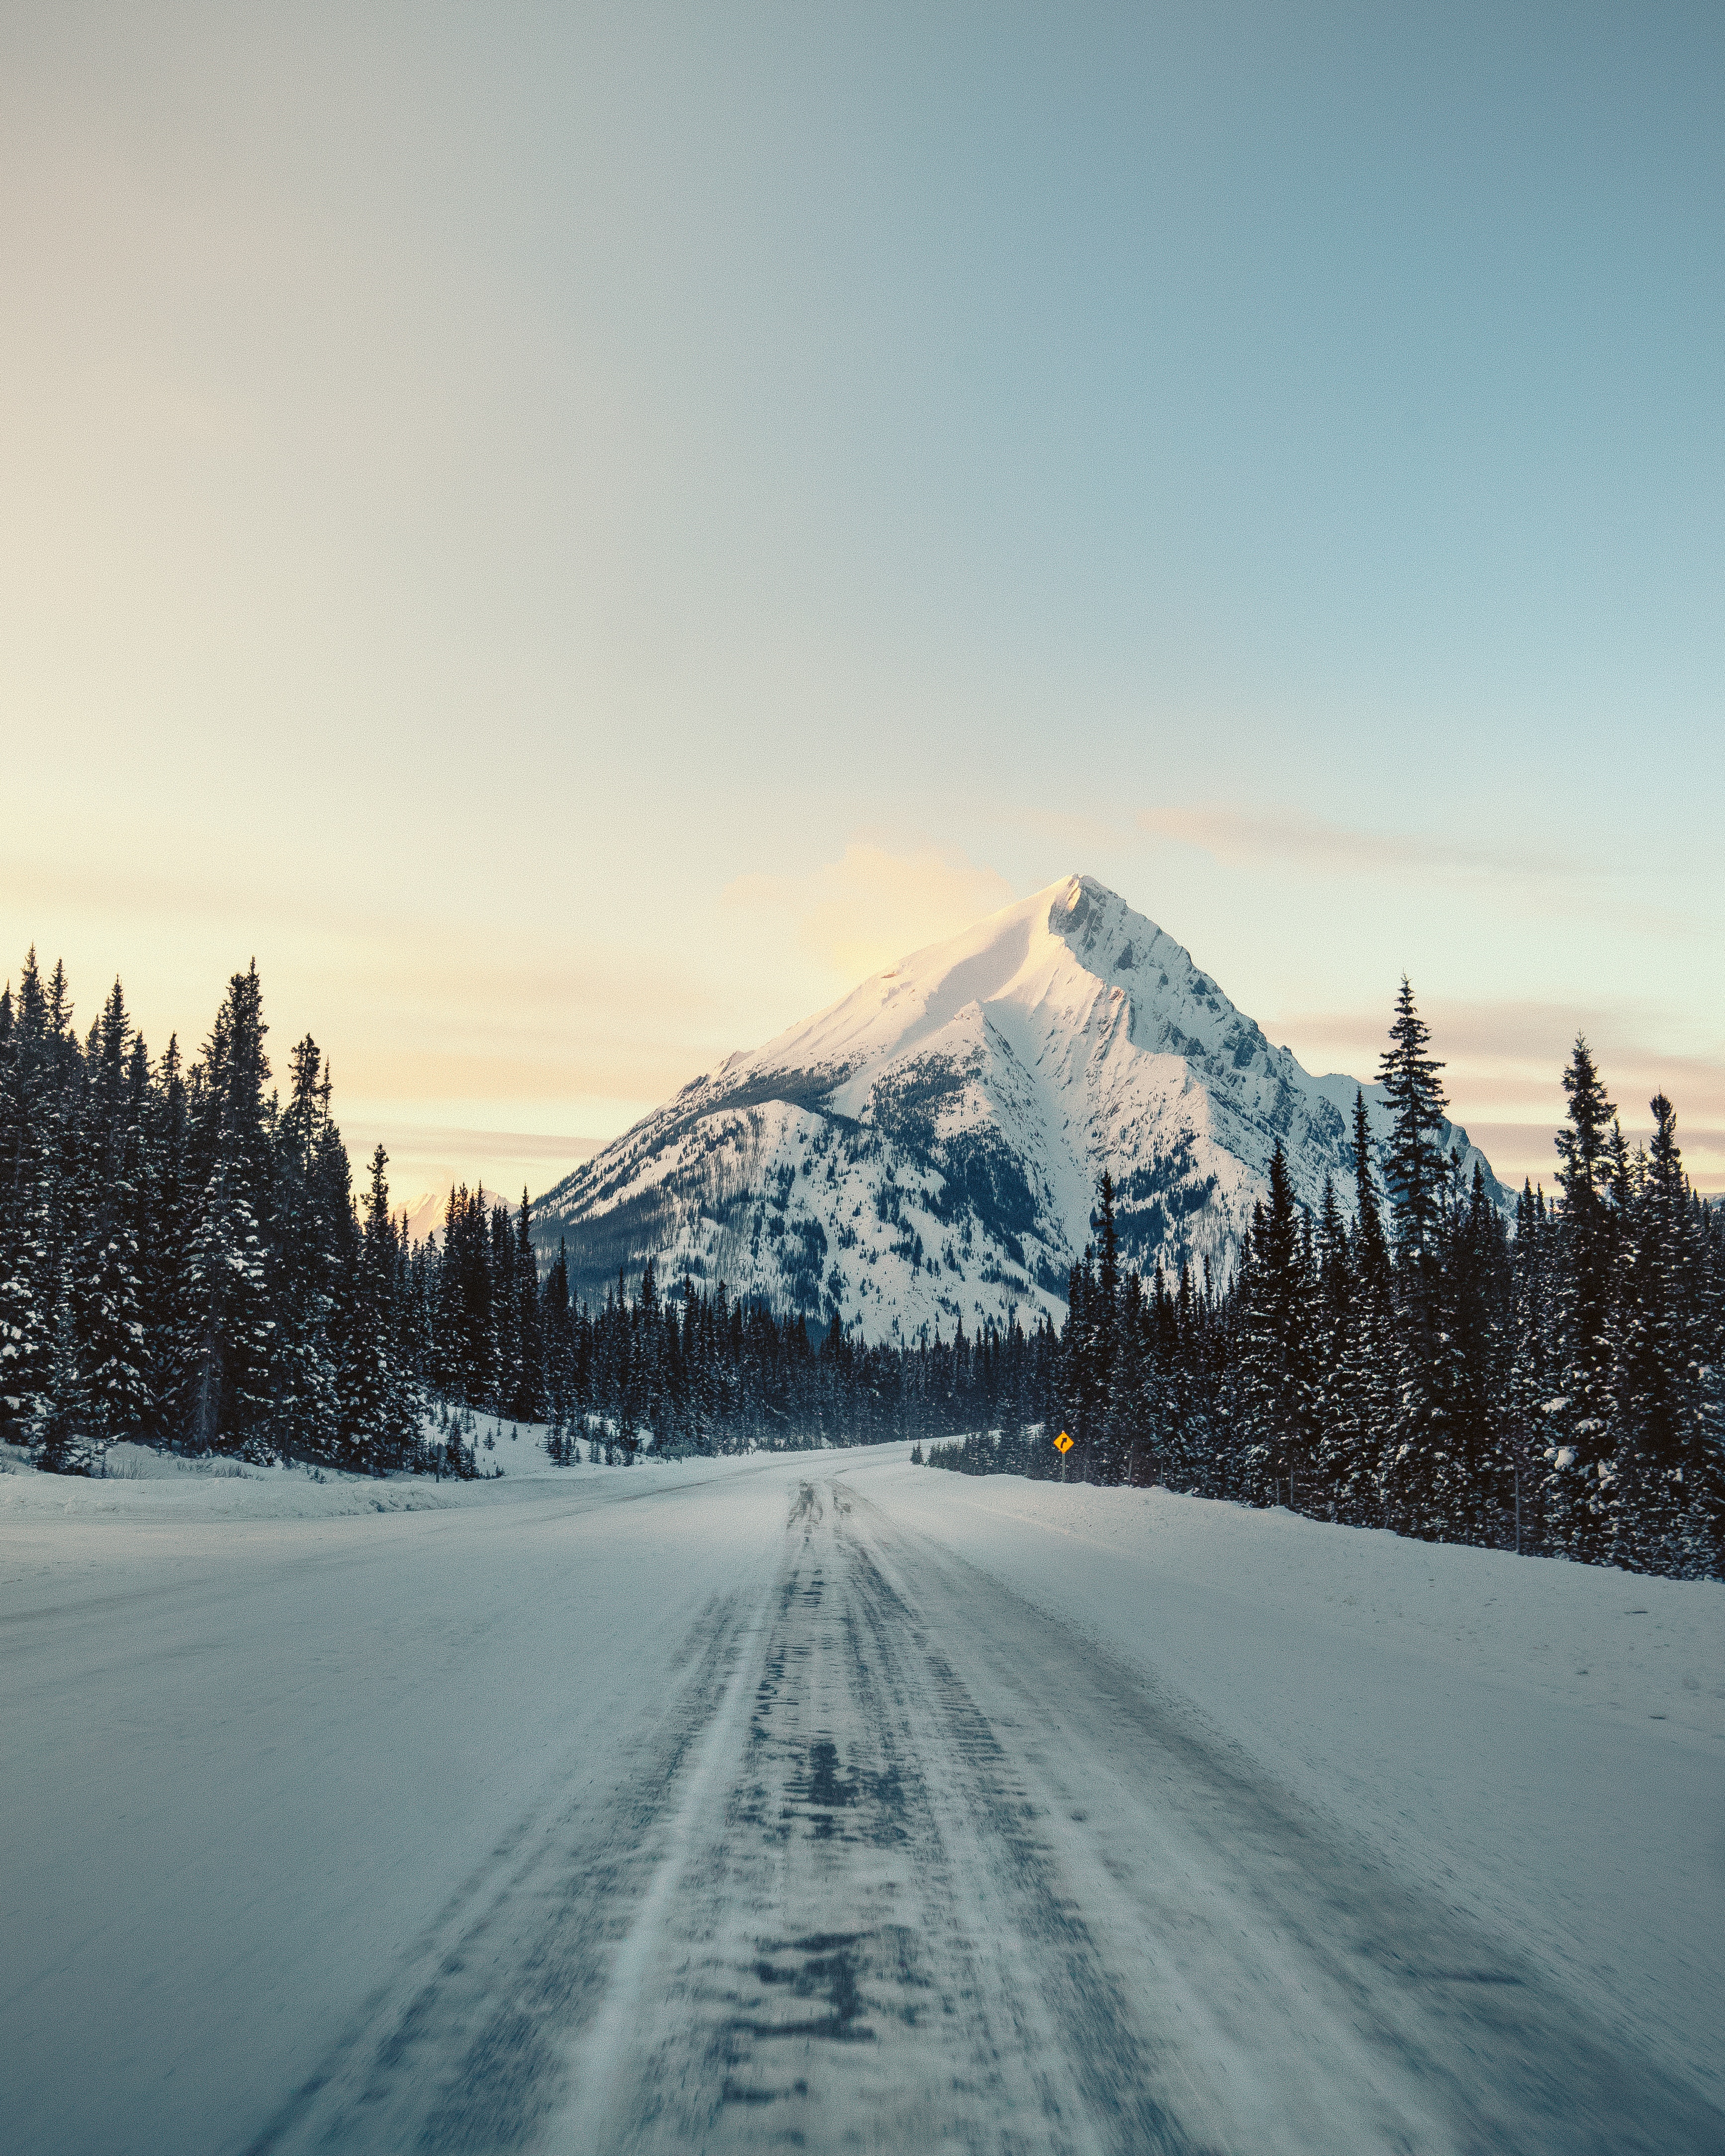 snow, landscape, winter, nature, trees, mountain, road